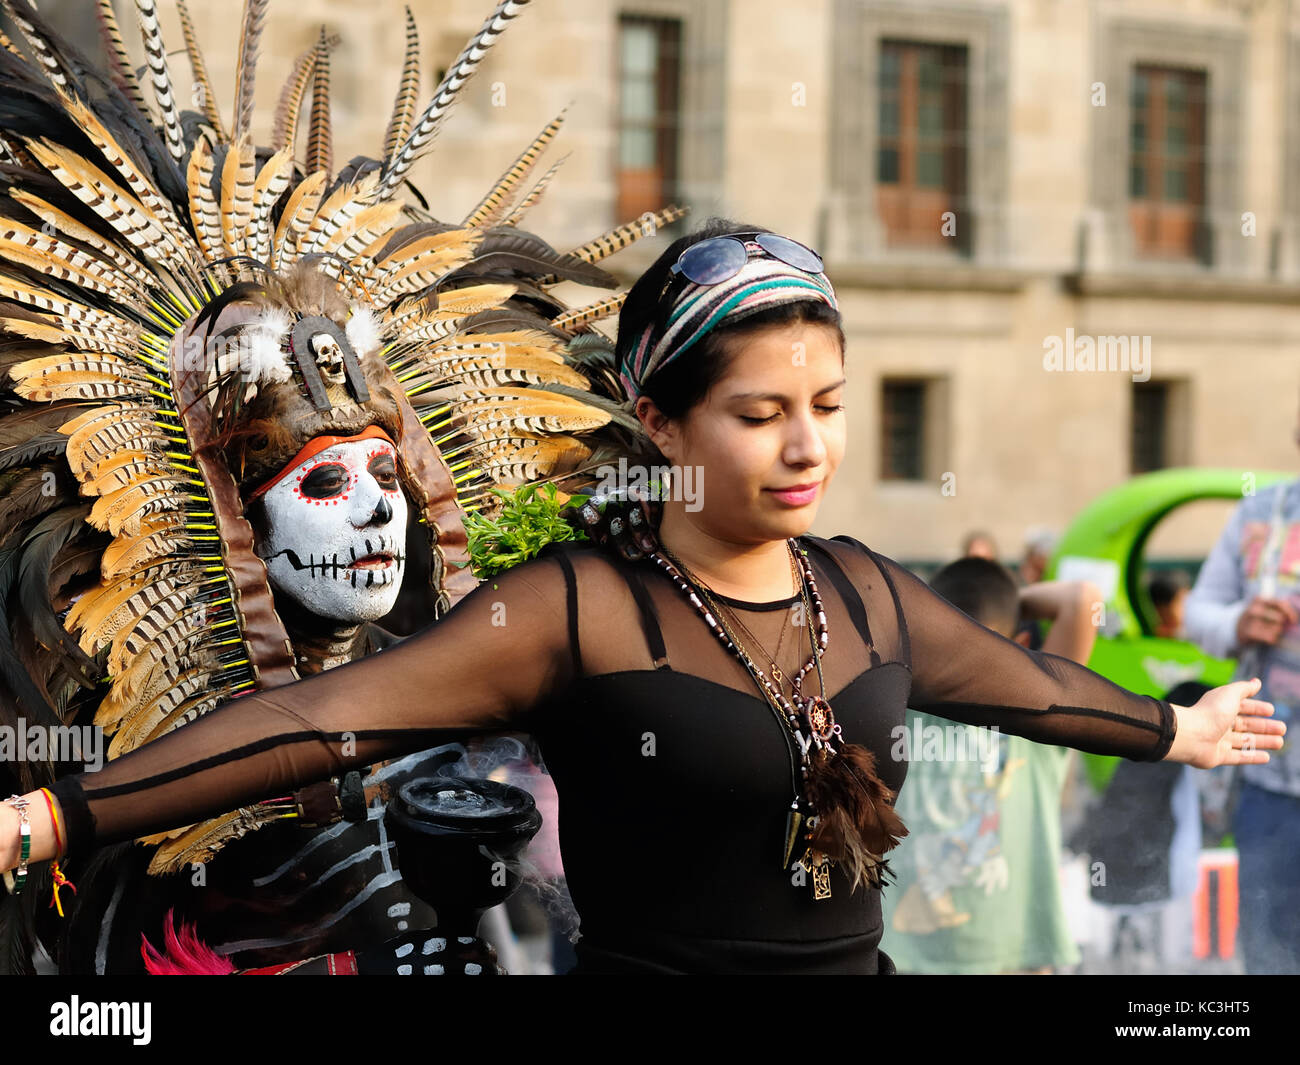 MEXICO, MEXICO - FEBRUARY 16:  Aztec sorcerer sending old ceremonies away on city dwellers of Mexico on February 16, 2013 Stock Photo